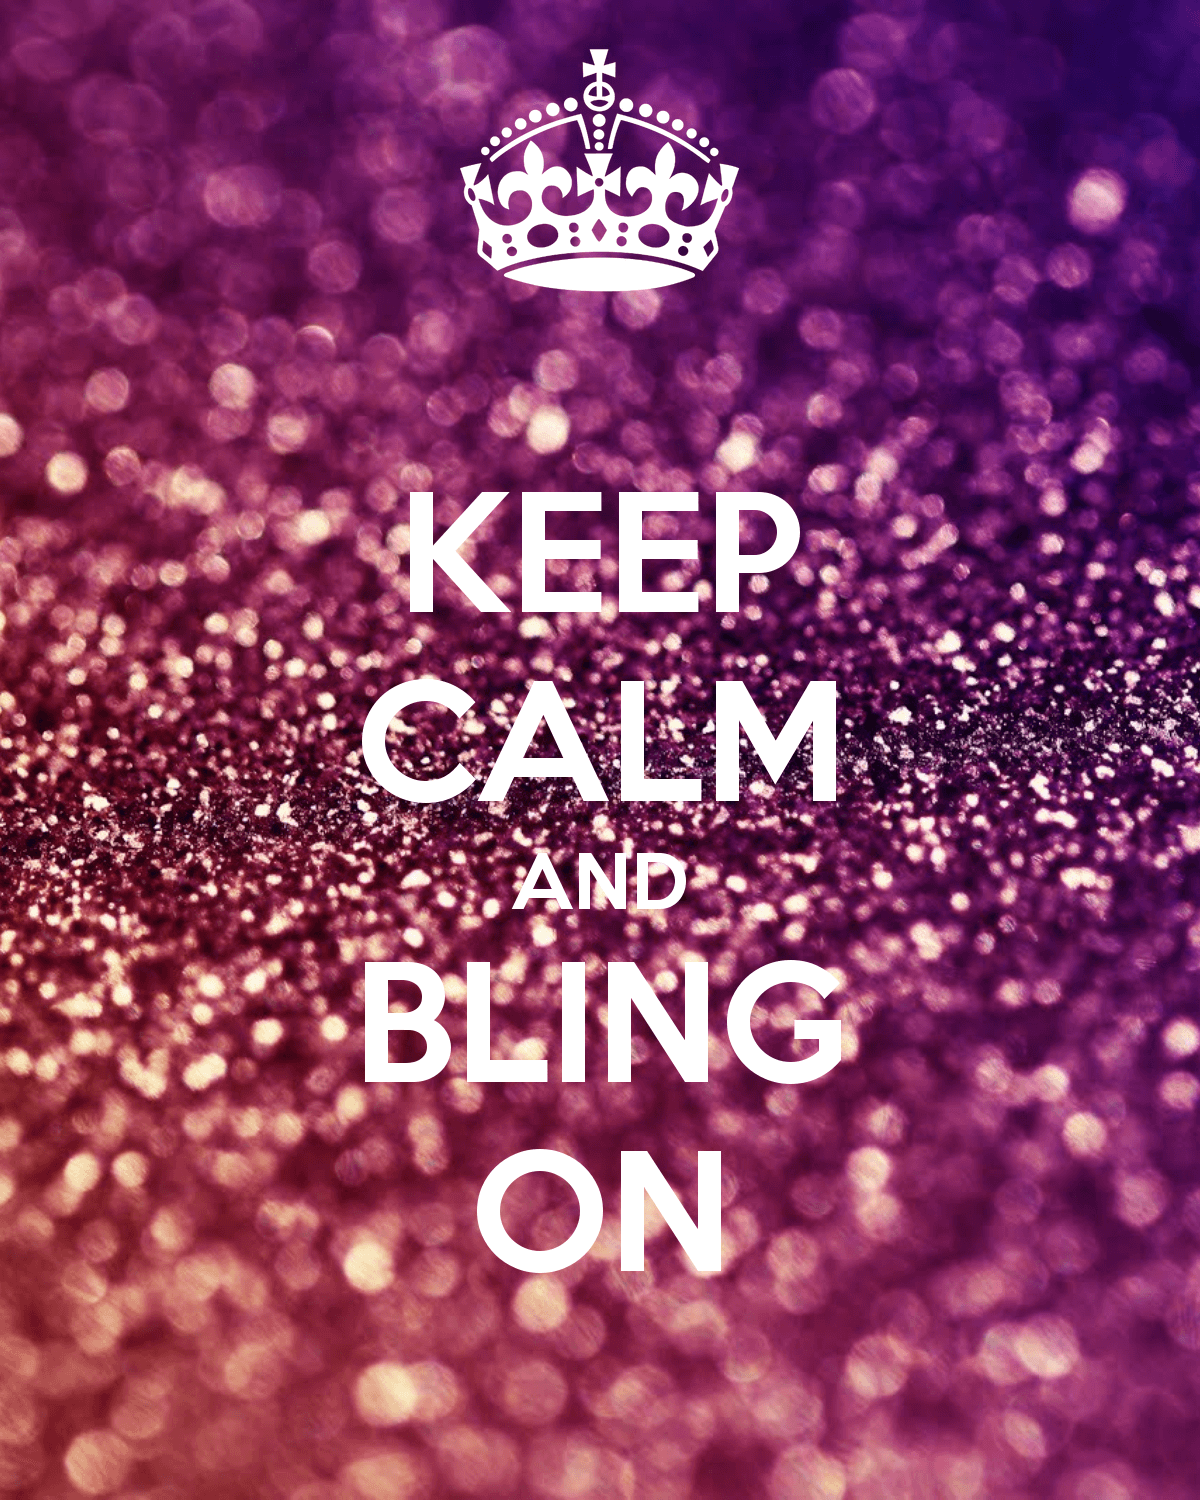 Best image about Keep calm and.. Big bows